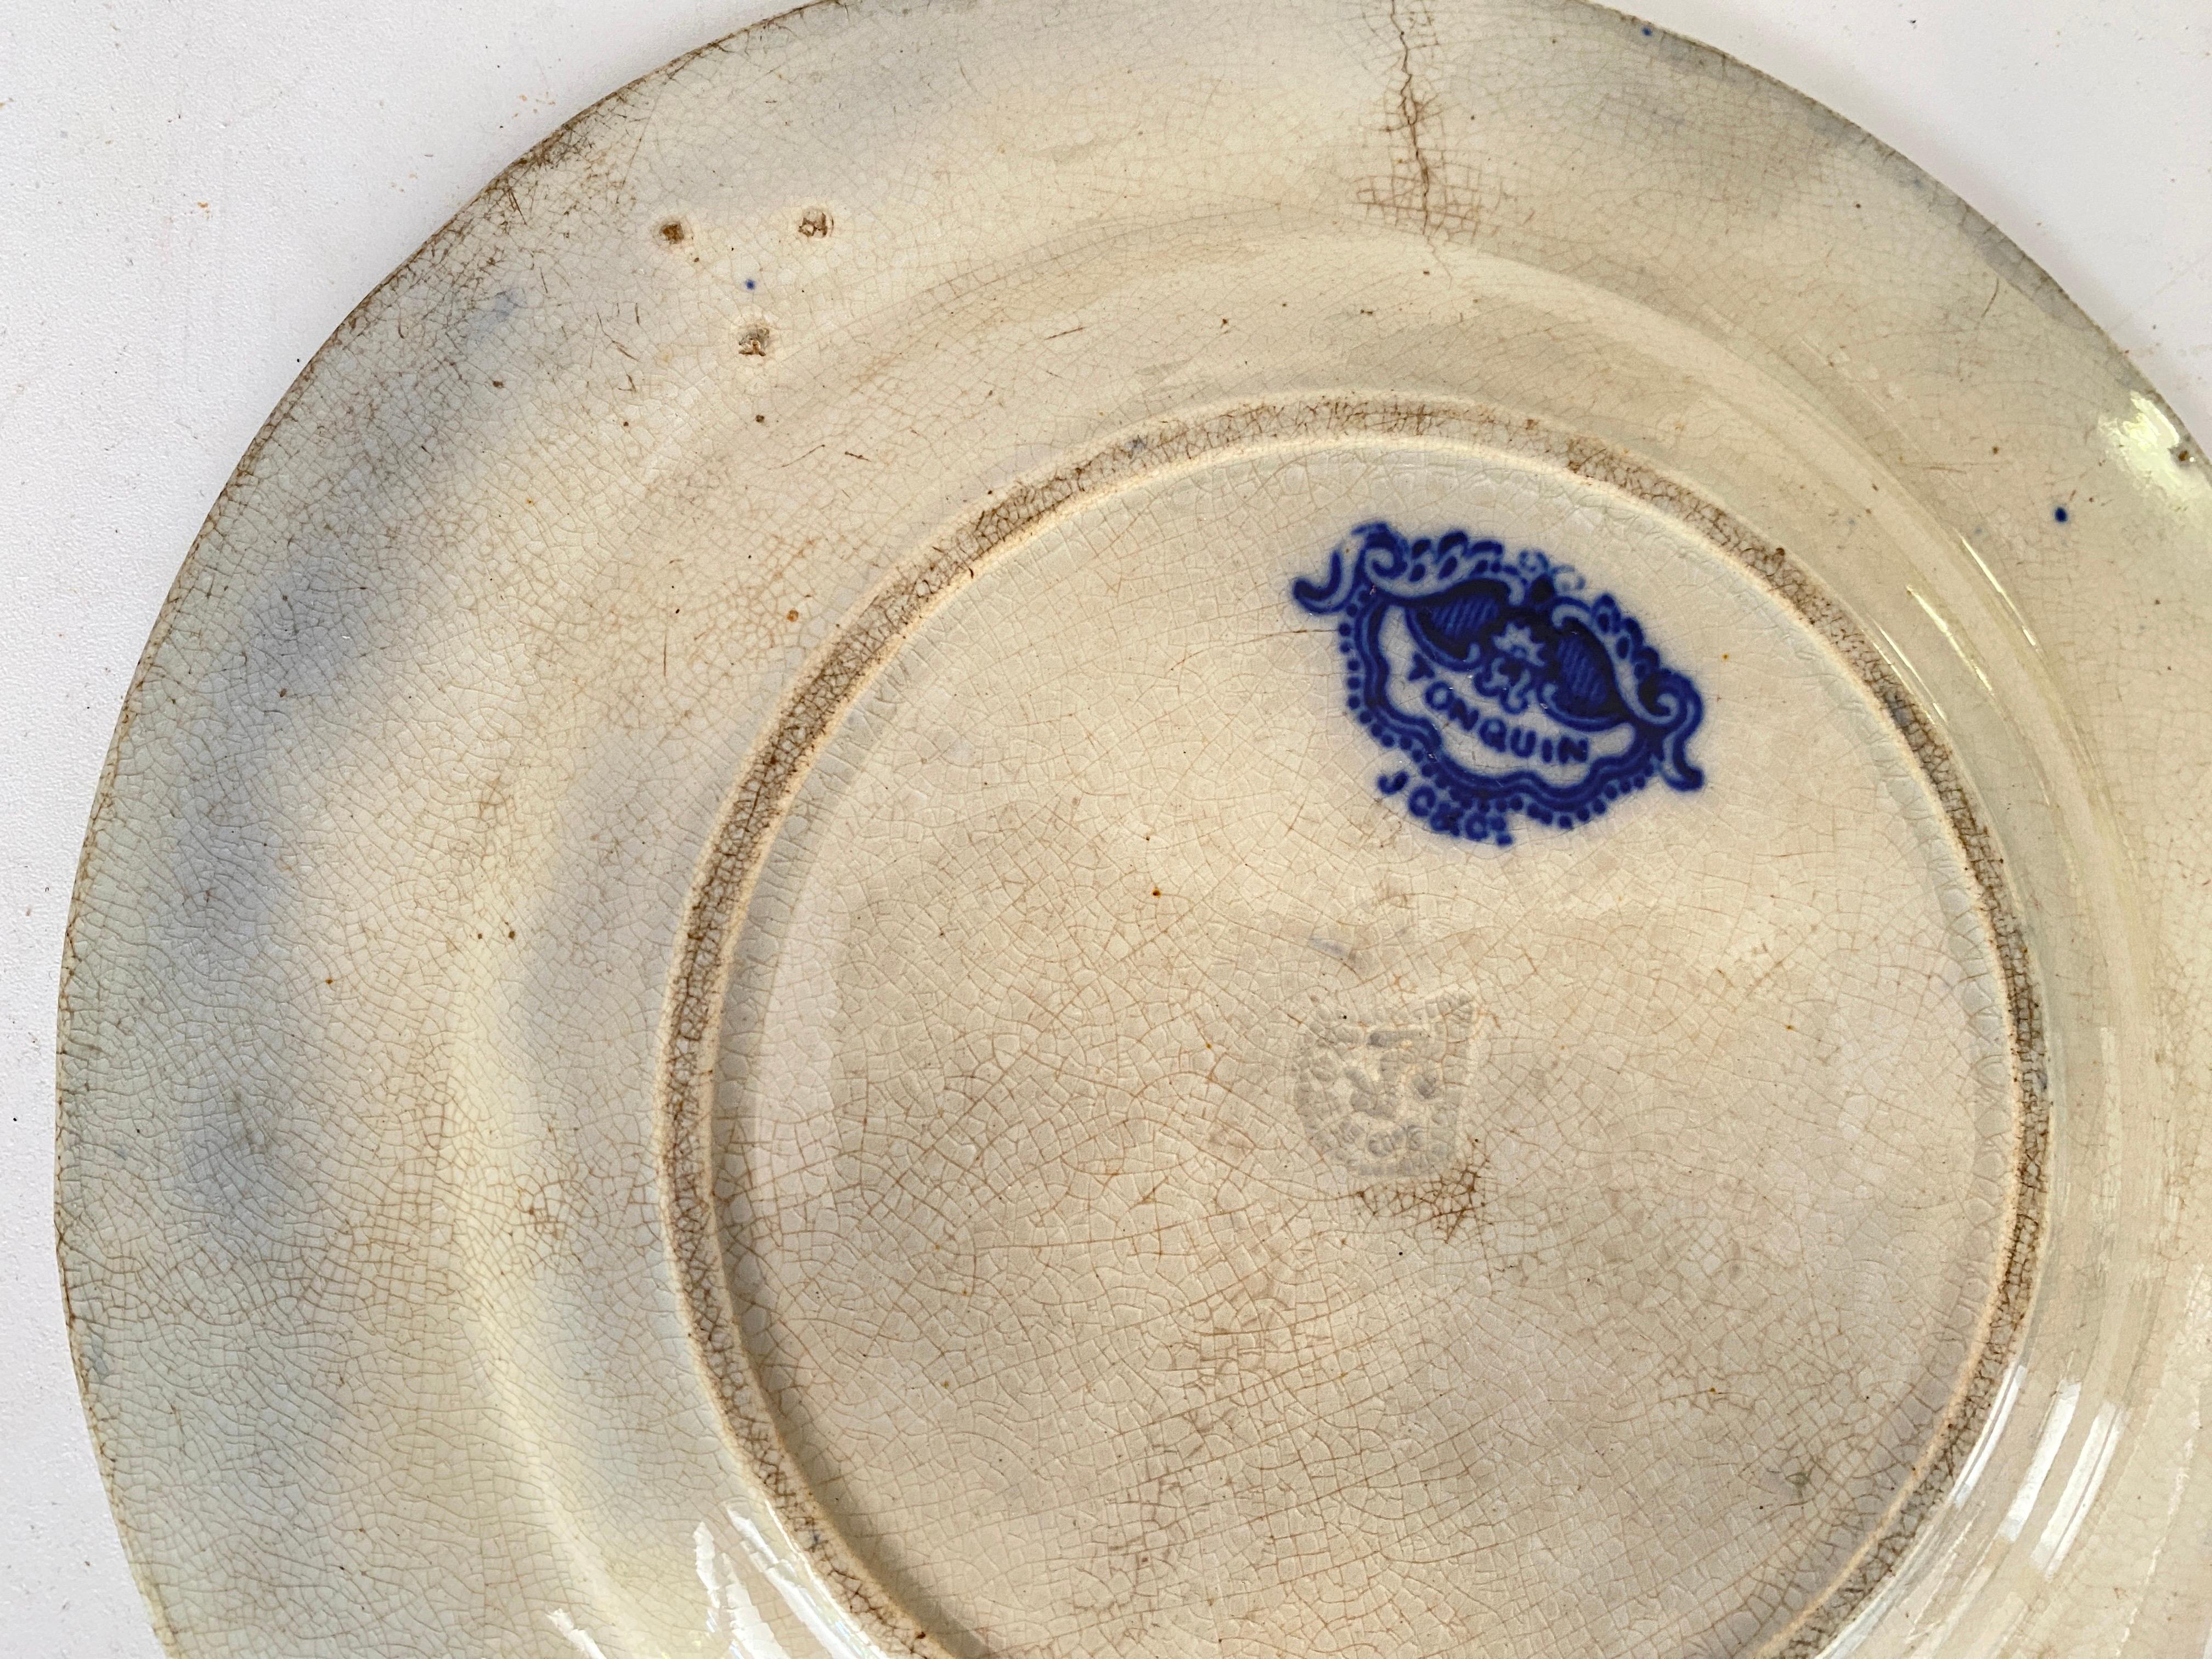 Old Dish by Jules viellard for Bordeaux. This Dish is in Faience, and has been made in France,during the 19th.
The plate is from another manufacturer.
The colors are blue. It is signed.